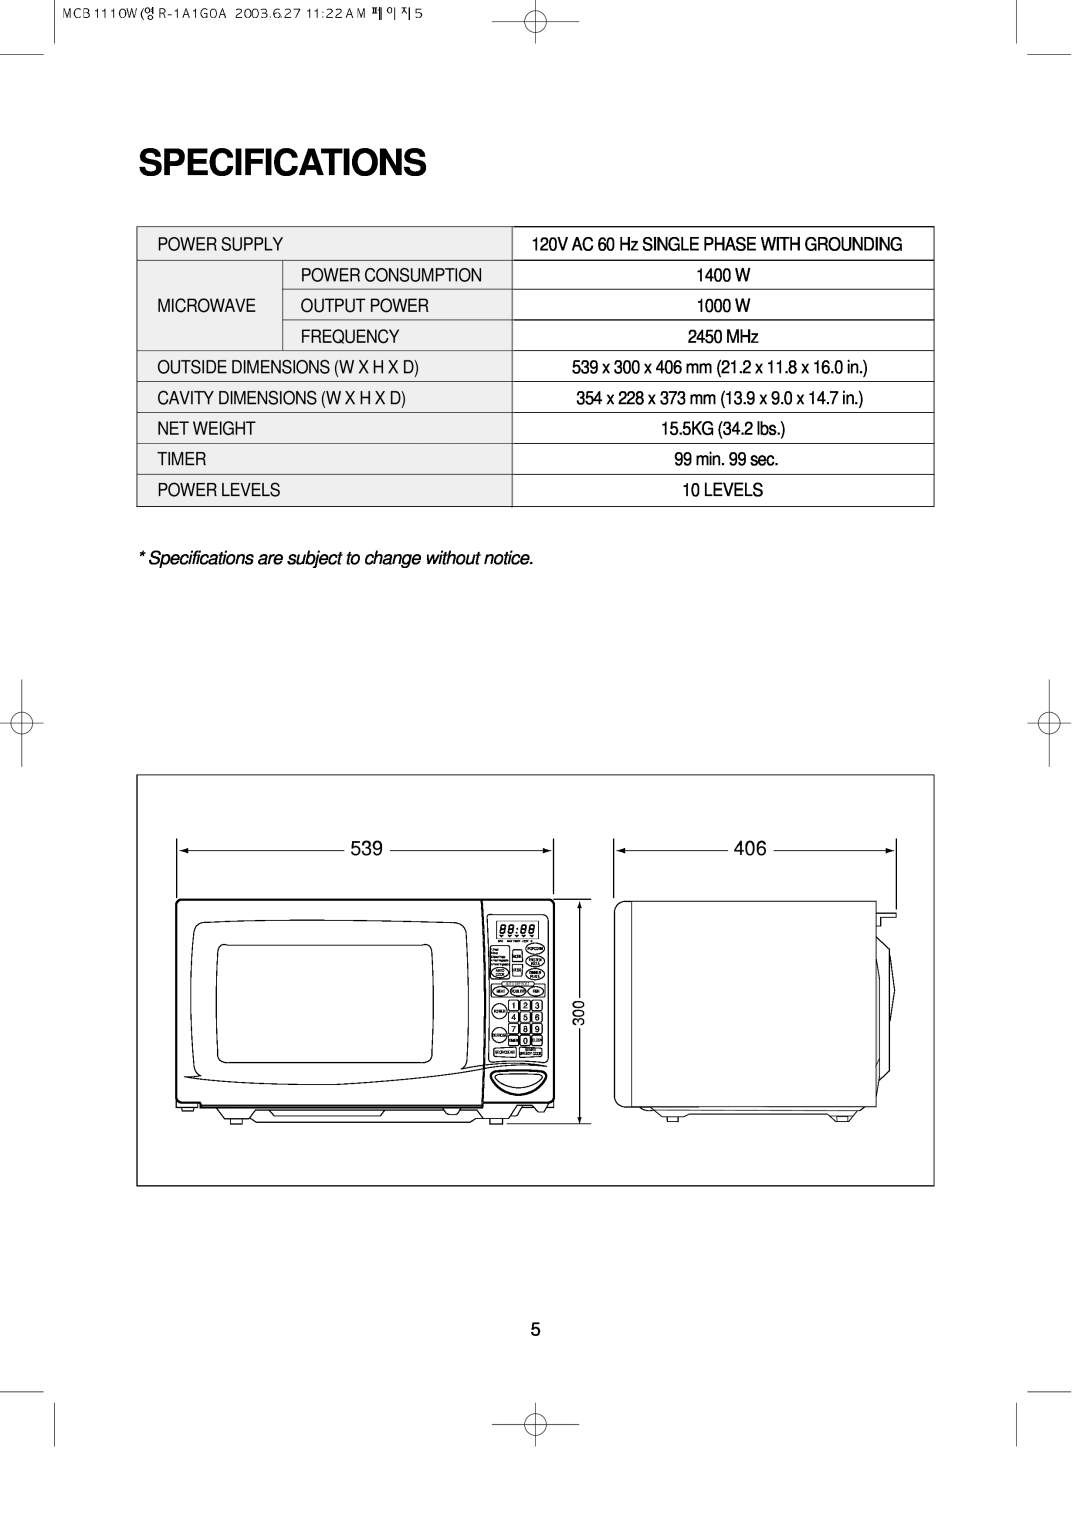 Magic Chef MCB1110W instruction manual Specifications 